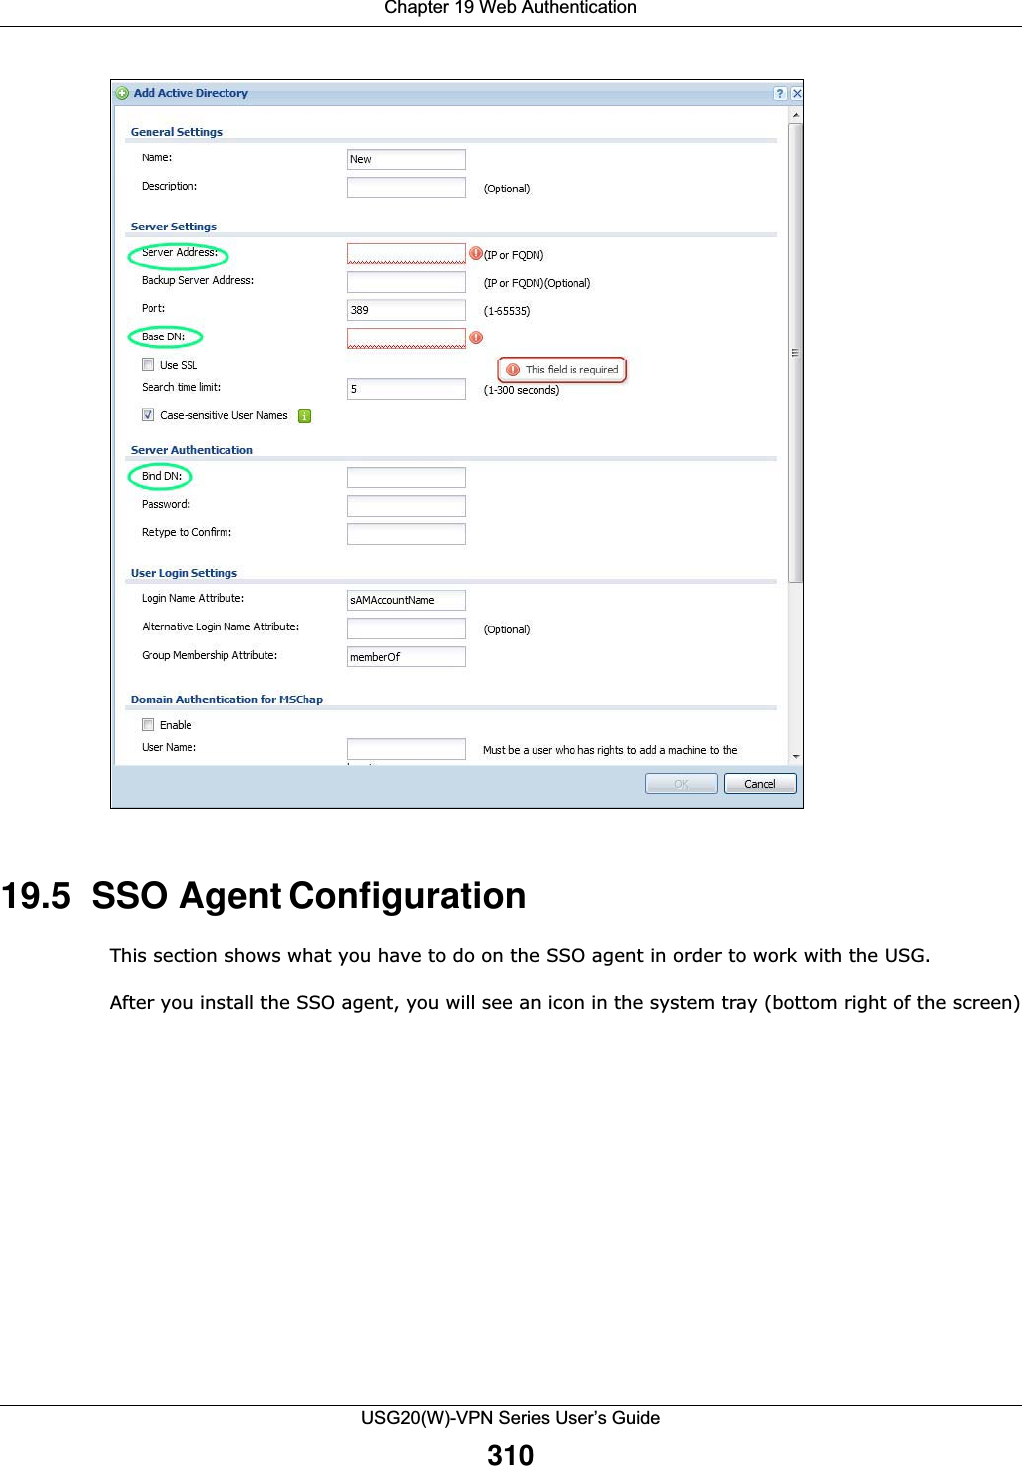 Chapter 19 Web AuthenticationUSG20(W)-VPN Series User’s Guide31019.5  SSO Agent ConfigurationThis section shows what you have to do on the SSO agent in order to work with the USG.After you install the SSO agent, you will see an icon in the system tray (bottom right of the screen)